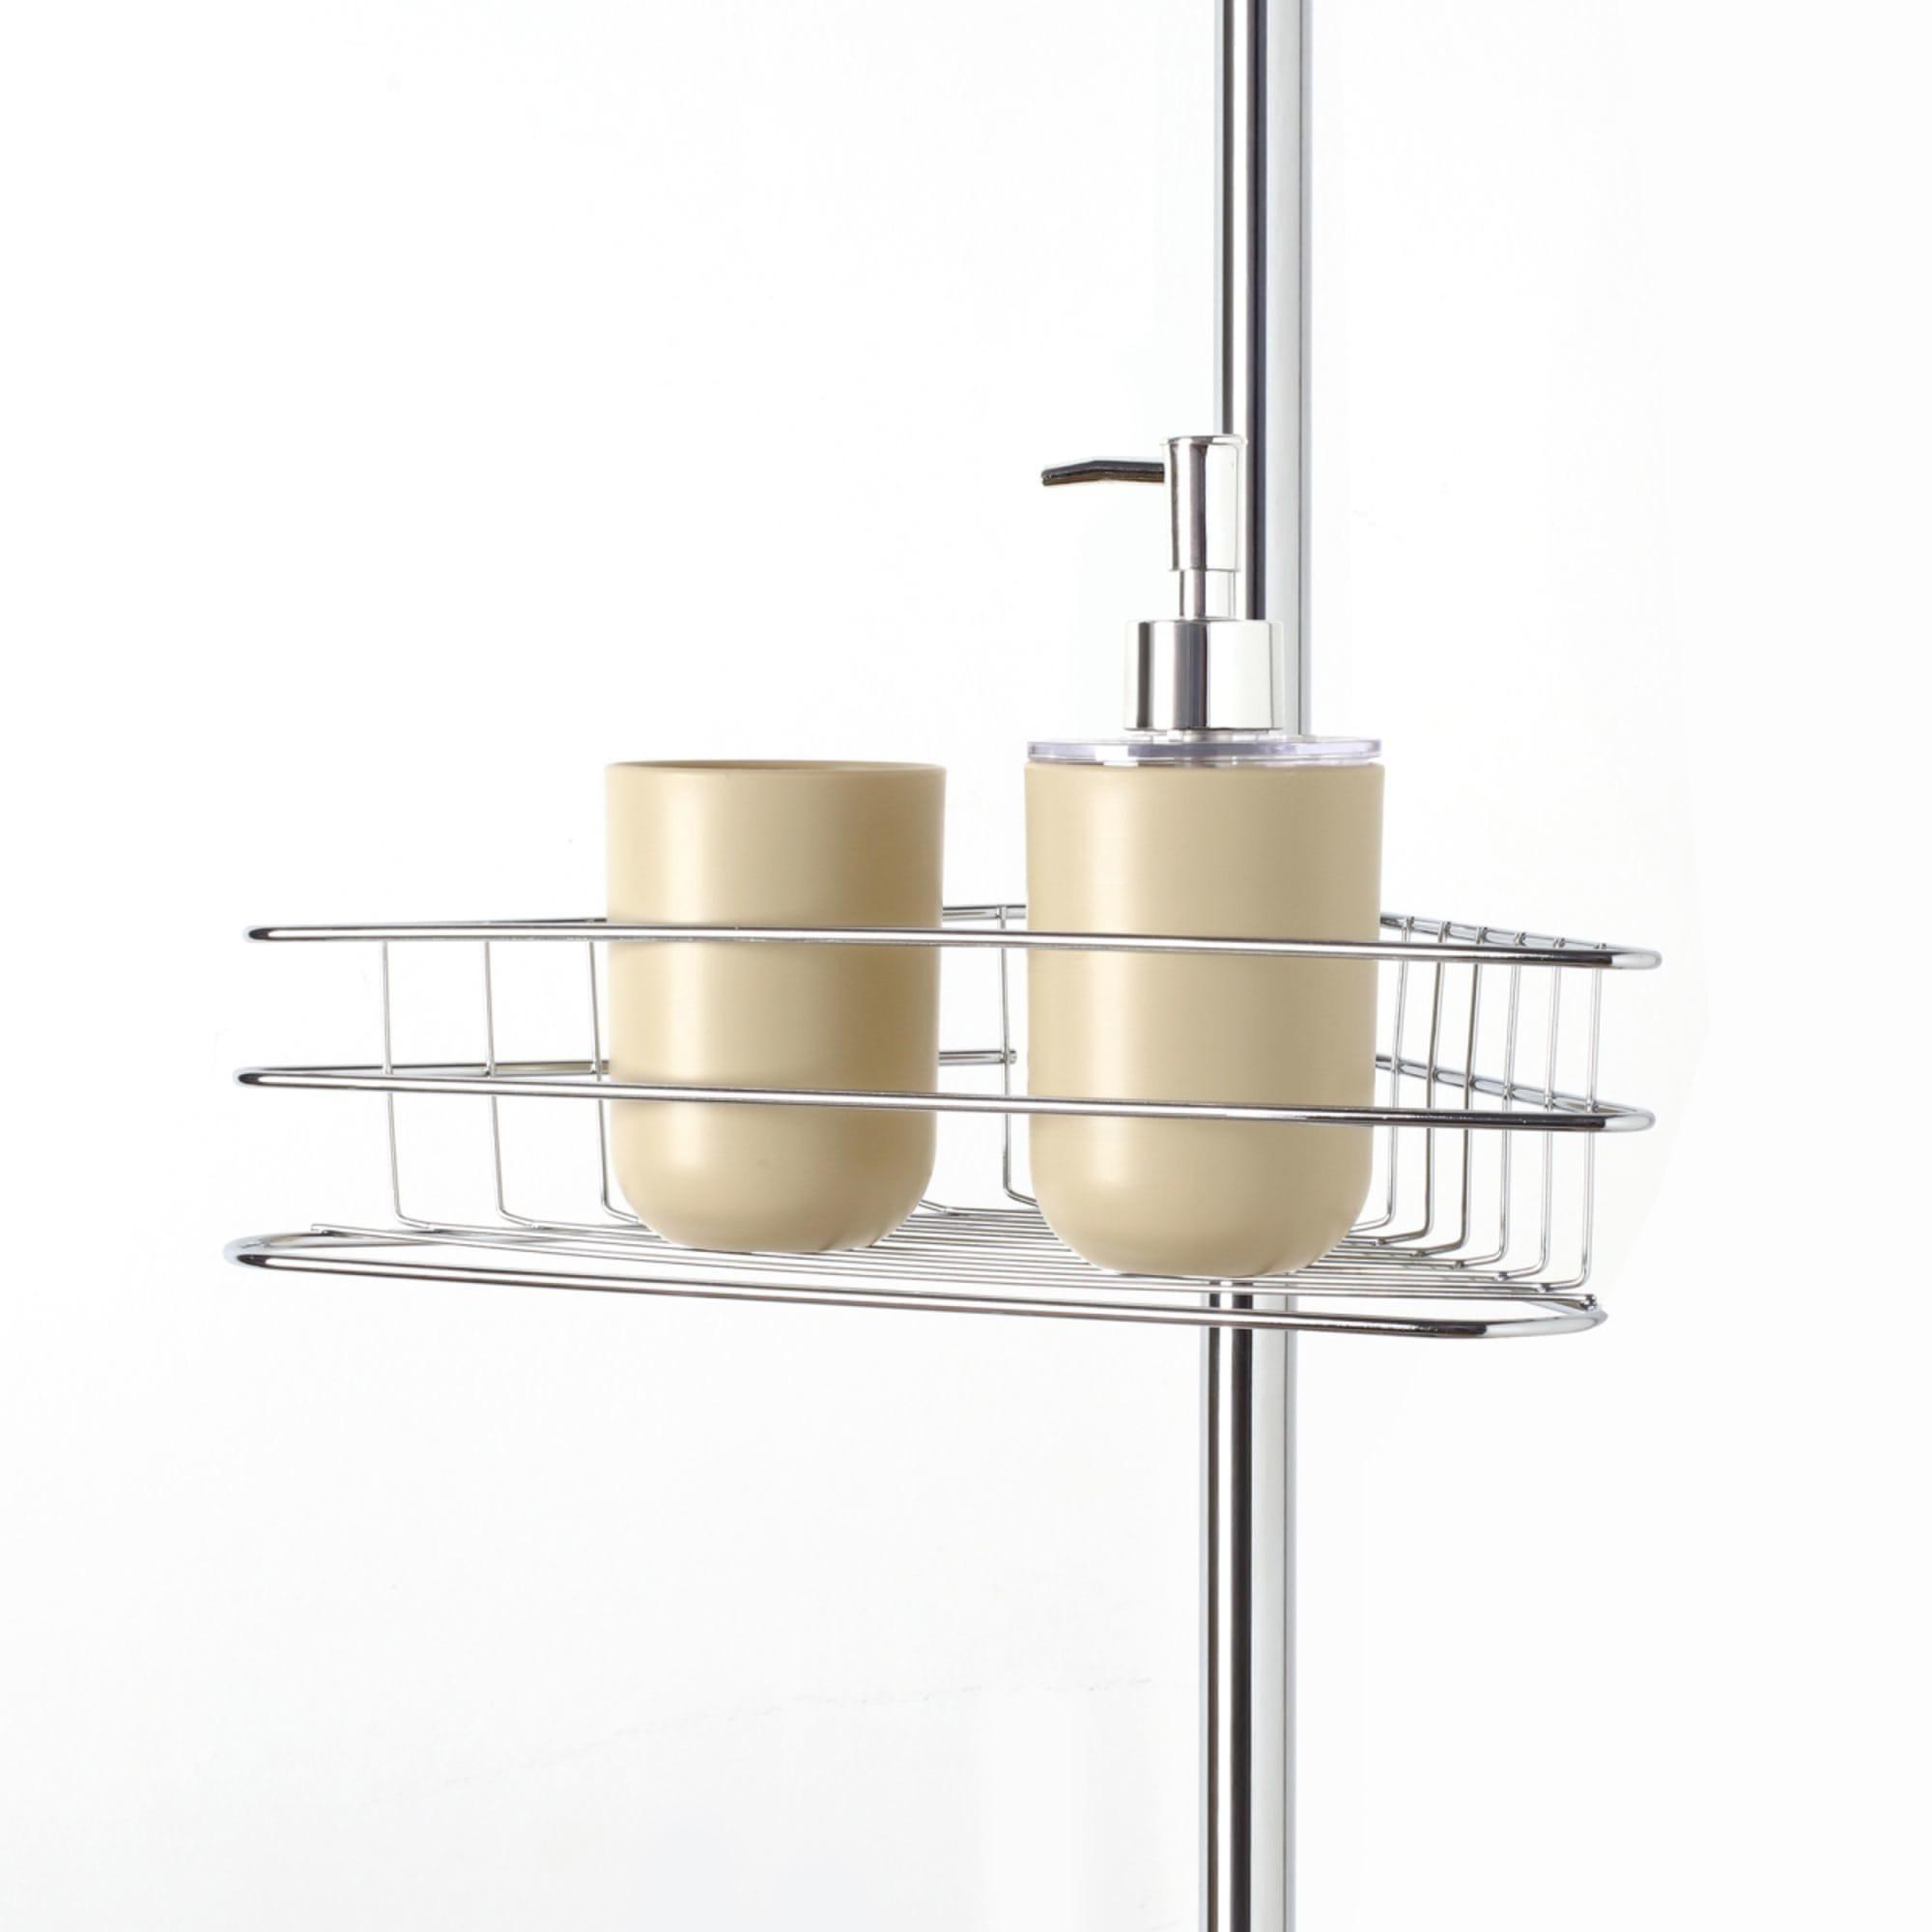 Sherwood Home 4 Tier Shower Caddy Silver Image 6